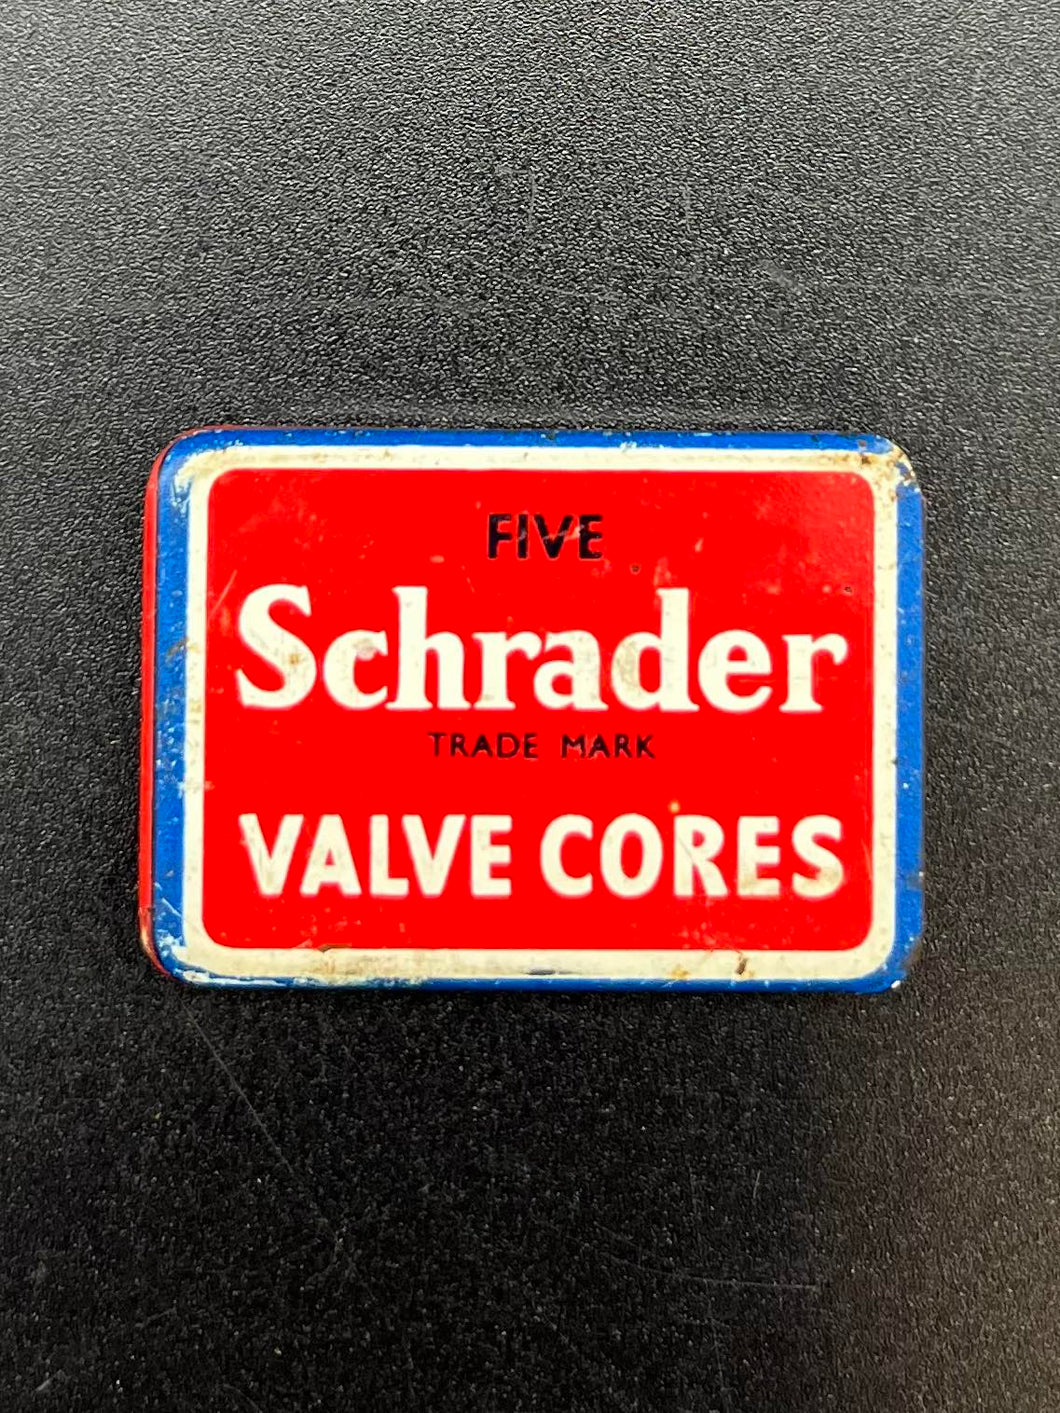 Schrader Valve Cores Tin - with Contents